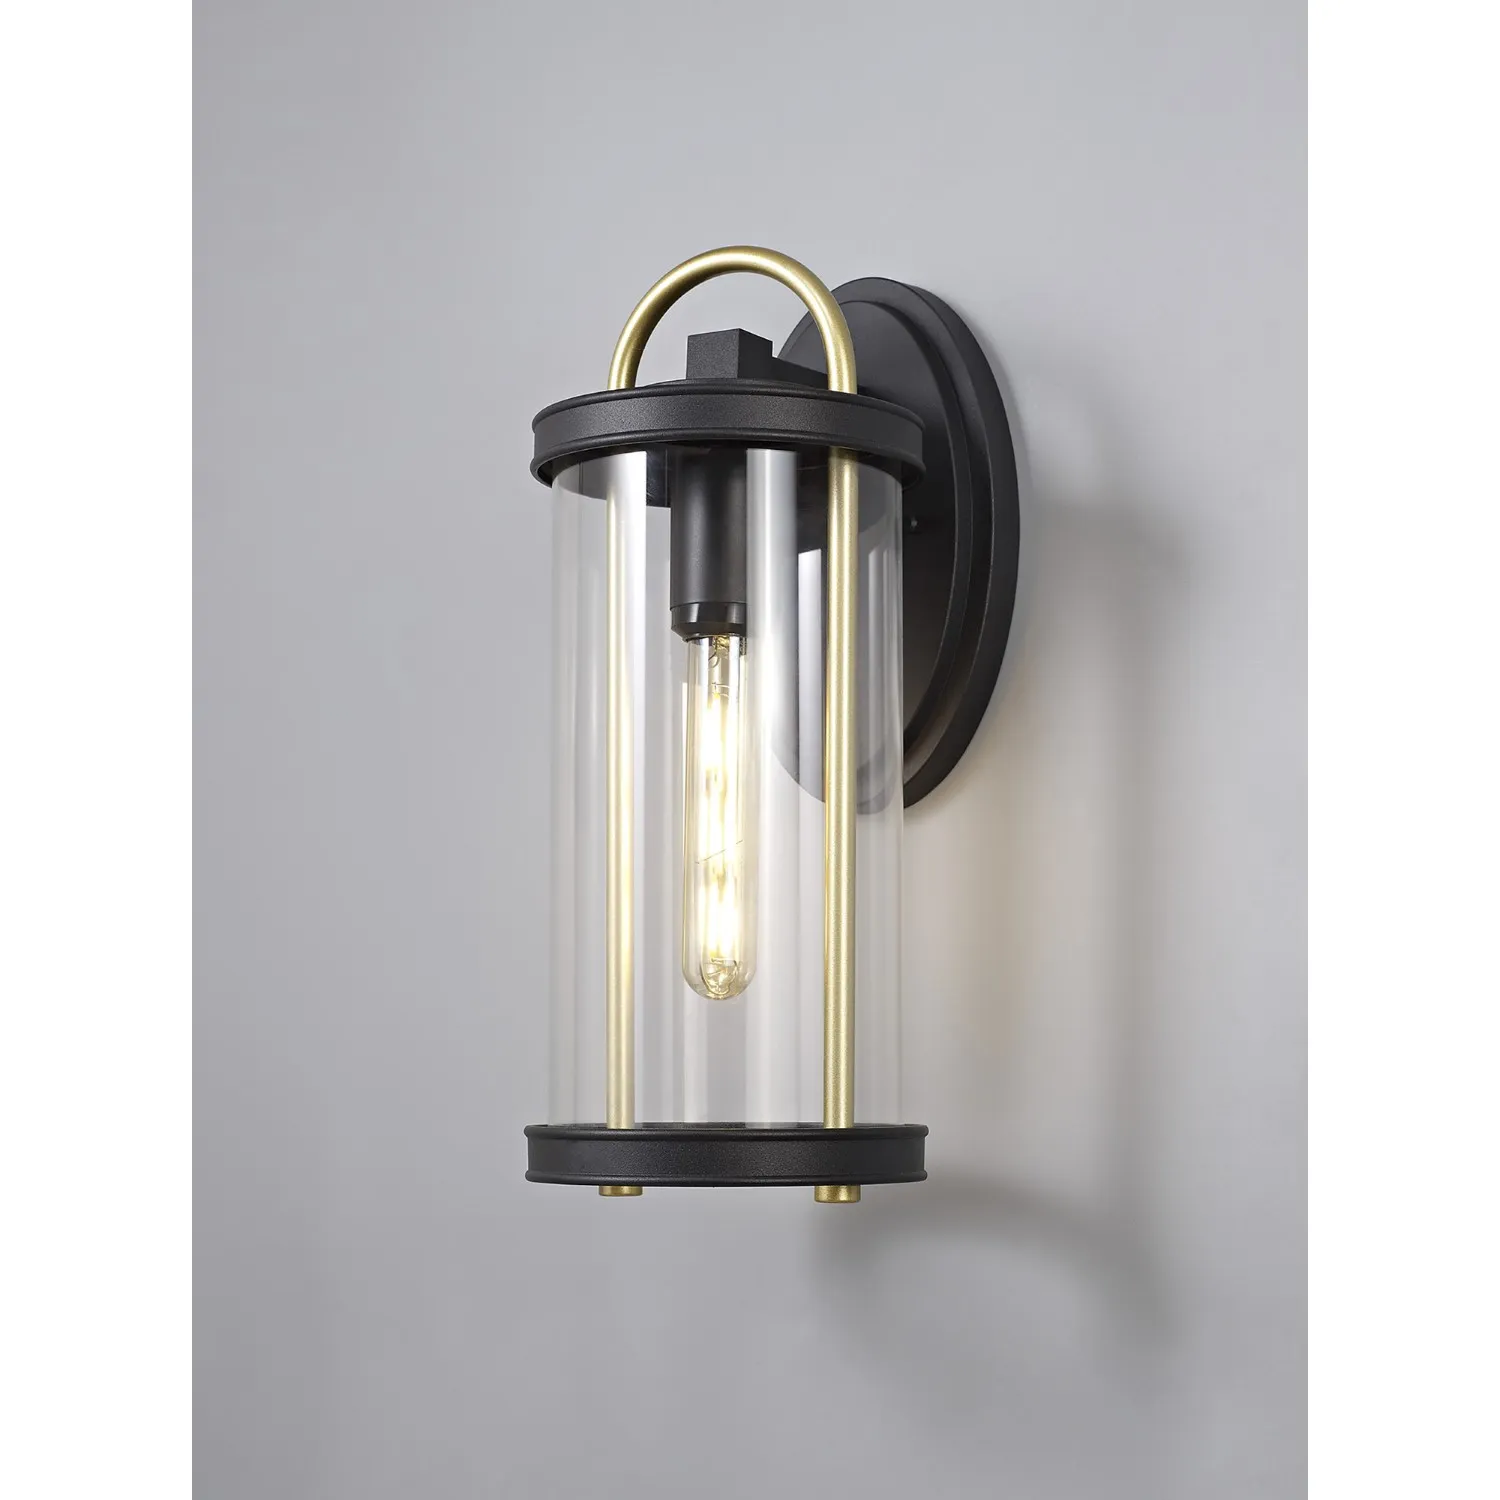 Bicester Large Wall Lamp, 1 x E27, Black And Gold Clear Glass, IP54, 2yrs Warranty